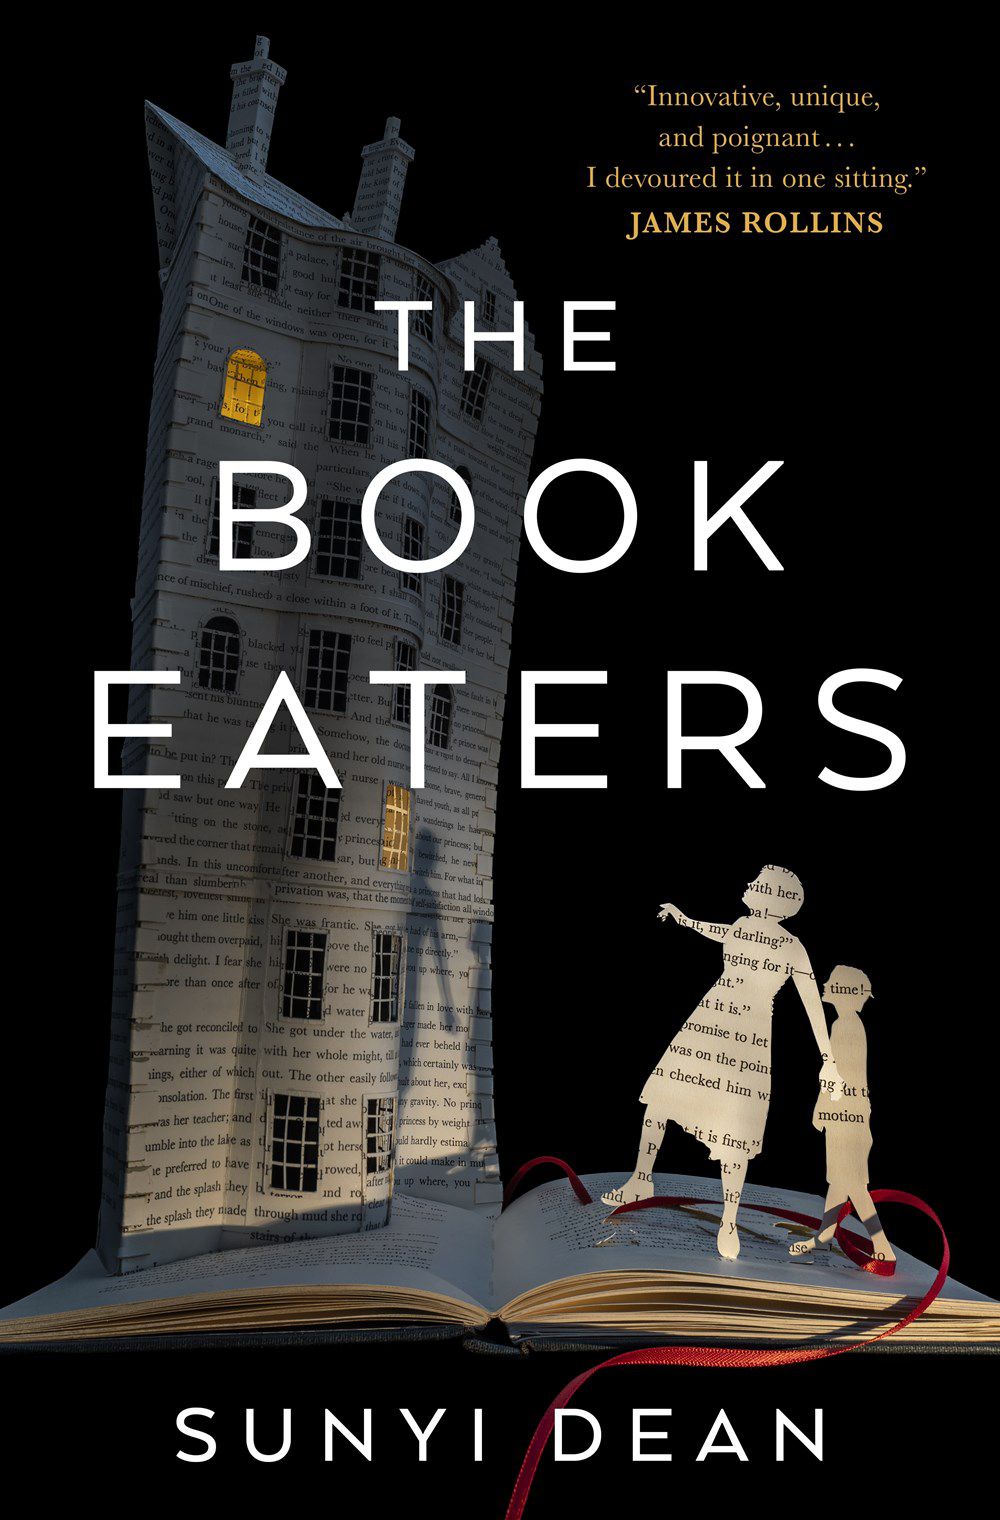 Cover image of The Book Eaters by Sunyi Dean, featuring a diorama of a parent, child, and home, all made up of pages from a book, while standing on a book.